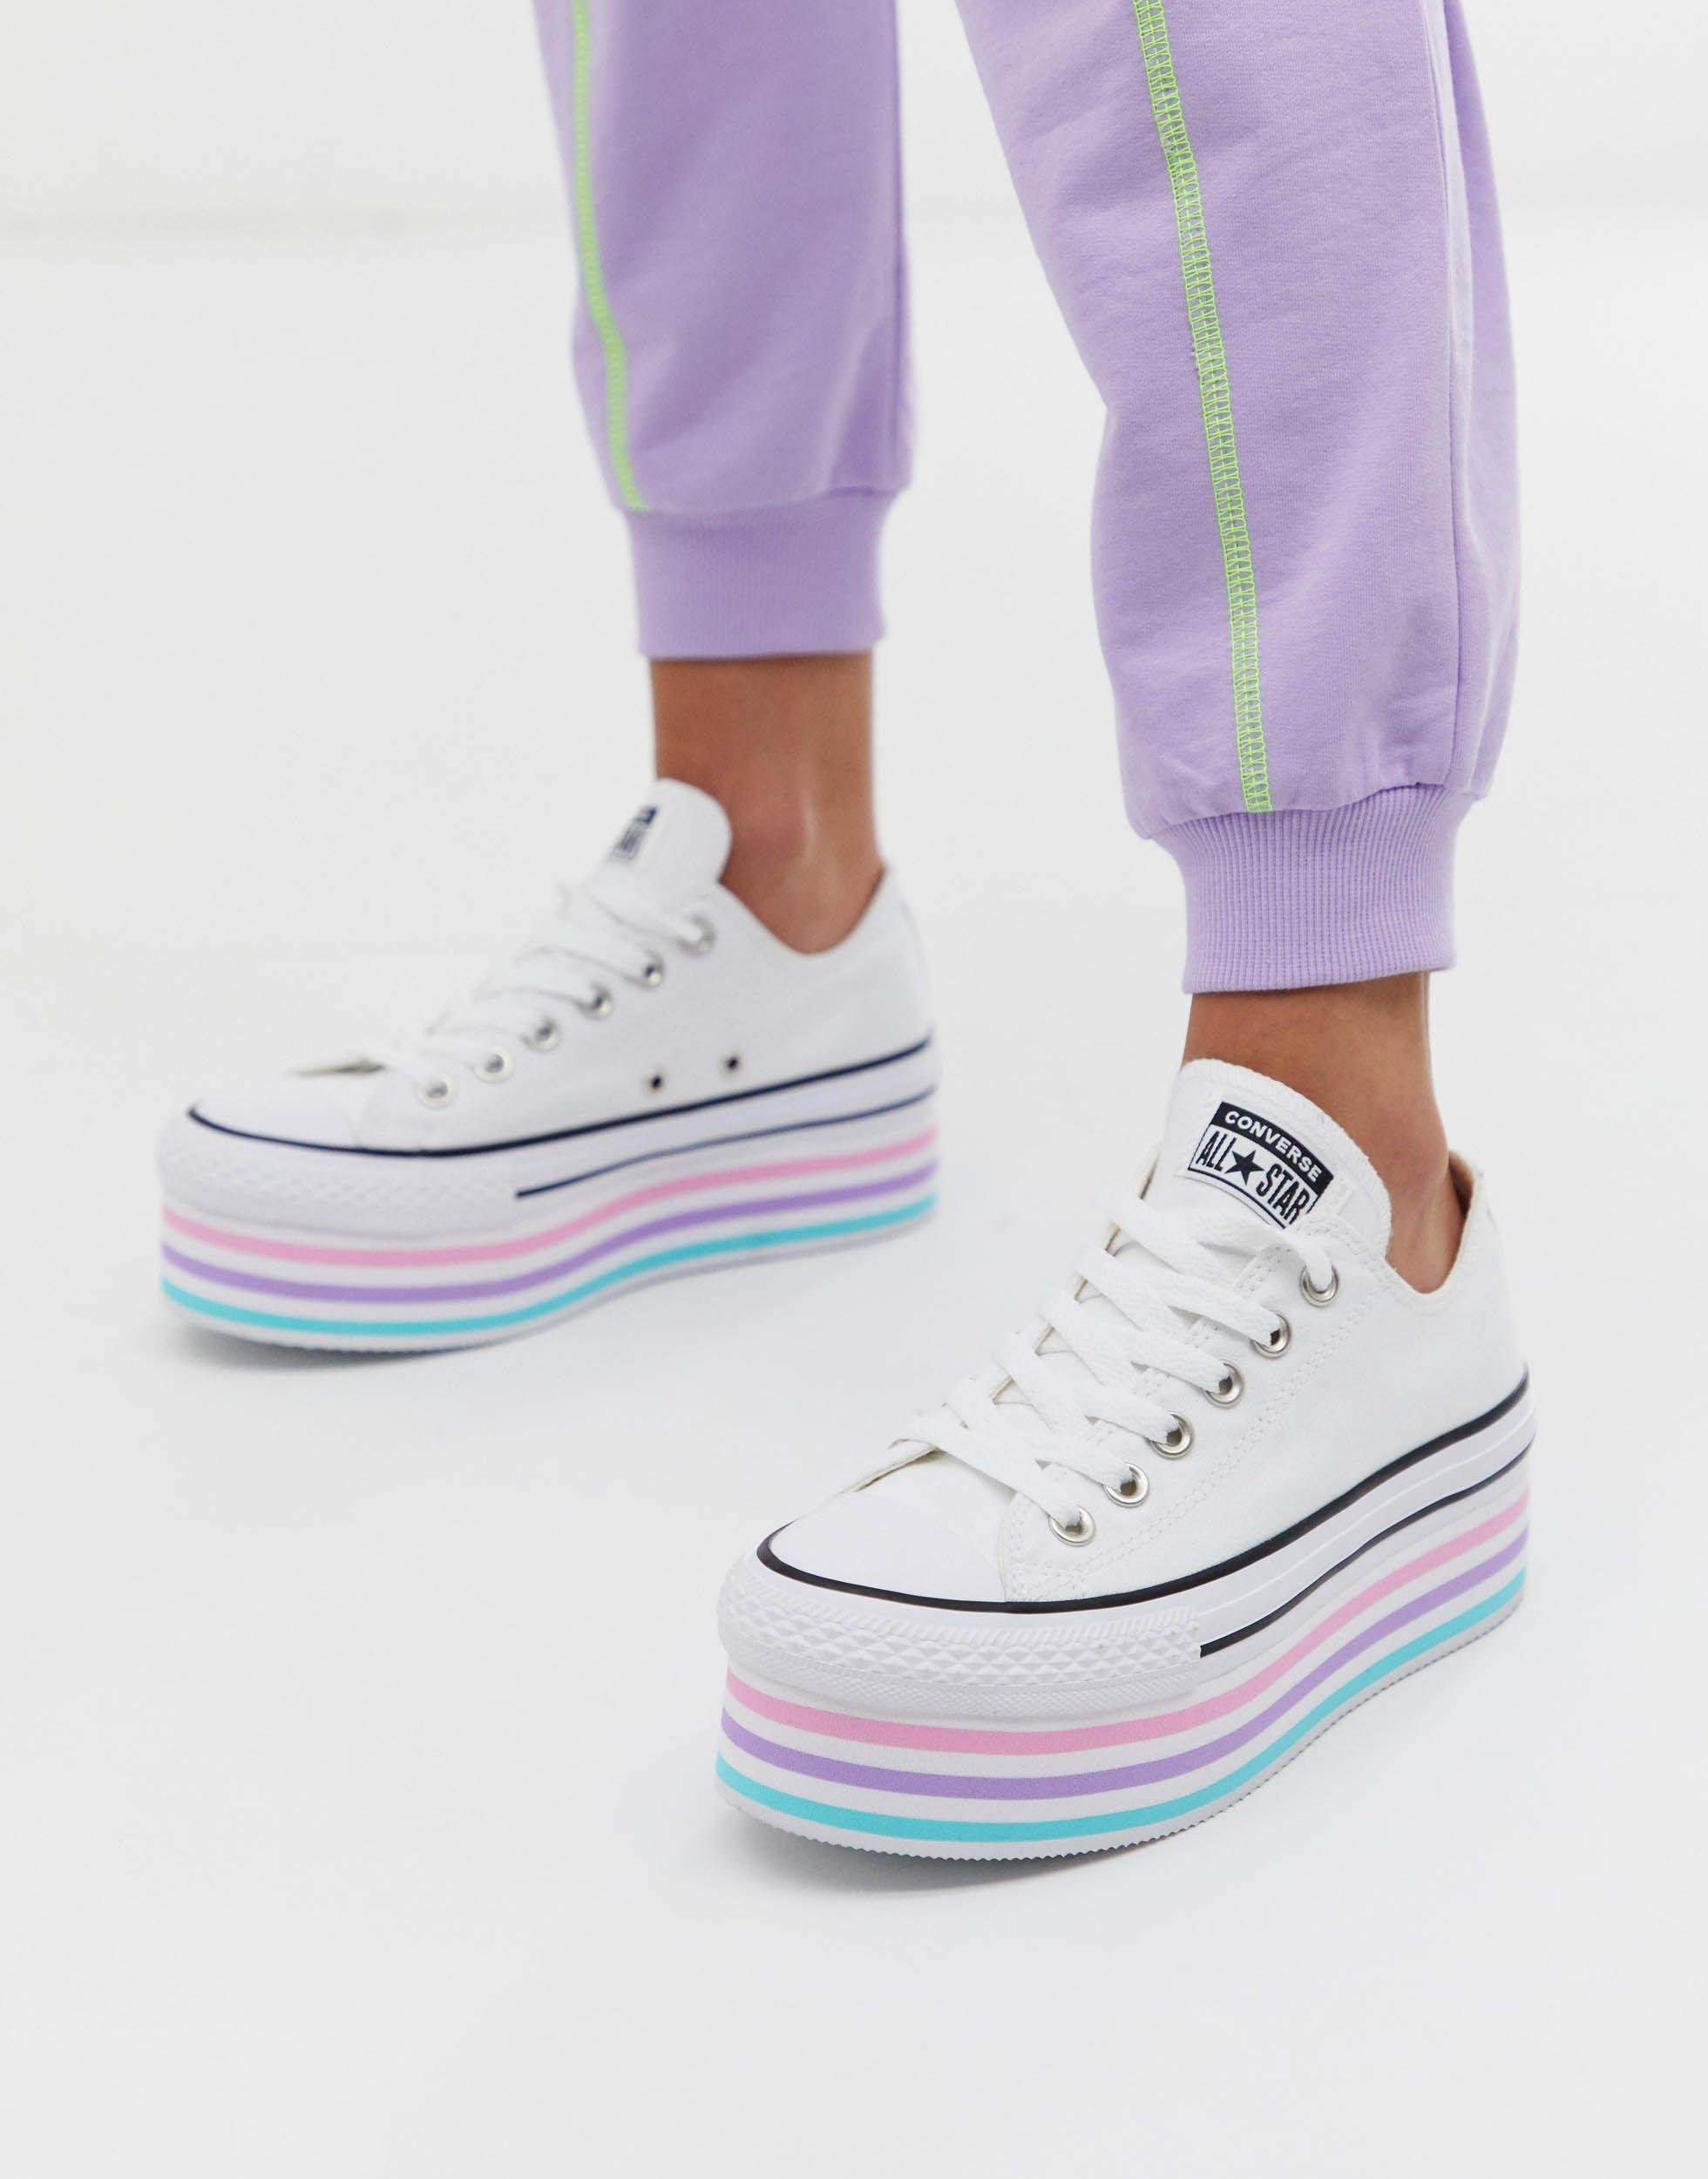 Or Diploma Excavation Converse Chuck Taylor All Star Super Platform Layer White Trainers | Lyst